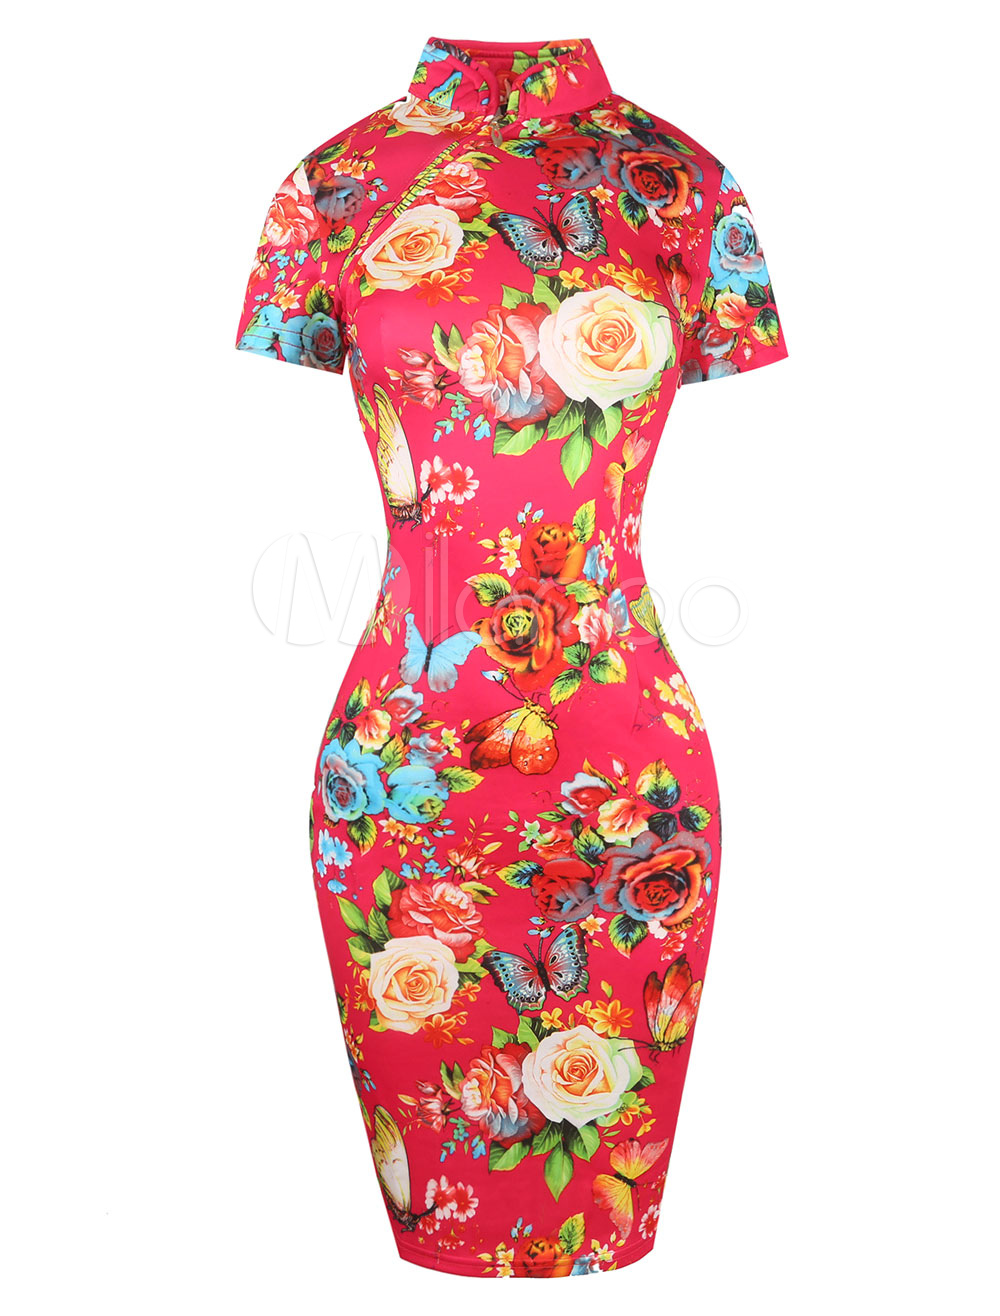 Red Vintage Dress Floral Printed Stand Collar Long Sleeve Slim Fit Bodycon Dress (Women\\'s Clothing Vintage Dresses) photo